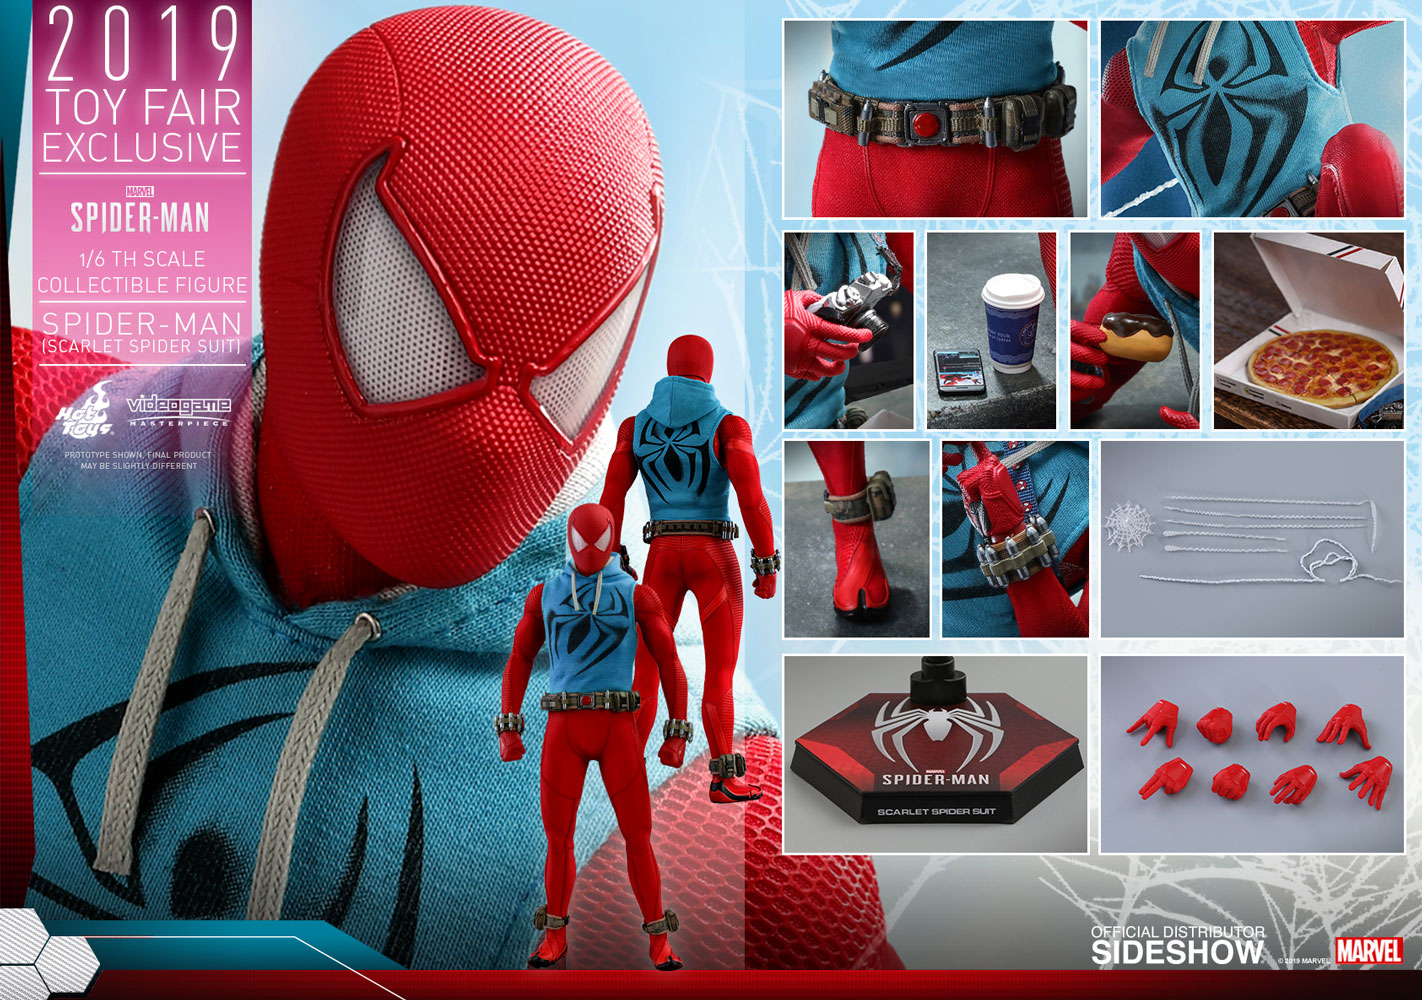 Spider-Man (Scarlet Spider Suit) Exclusive Edition (Prototype Shown) View 21